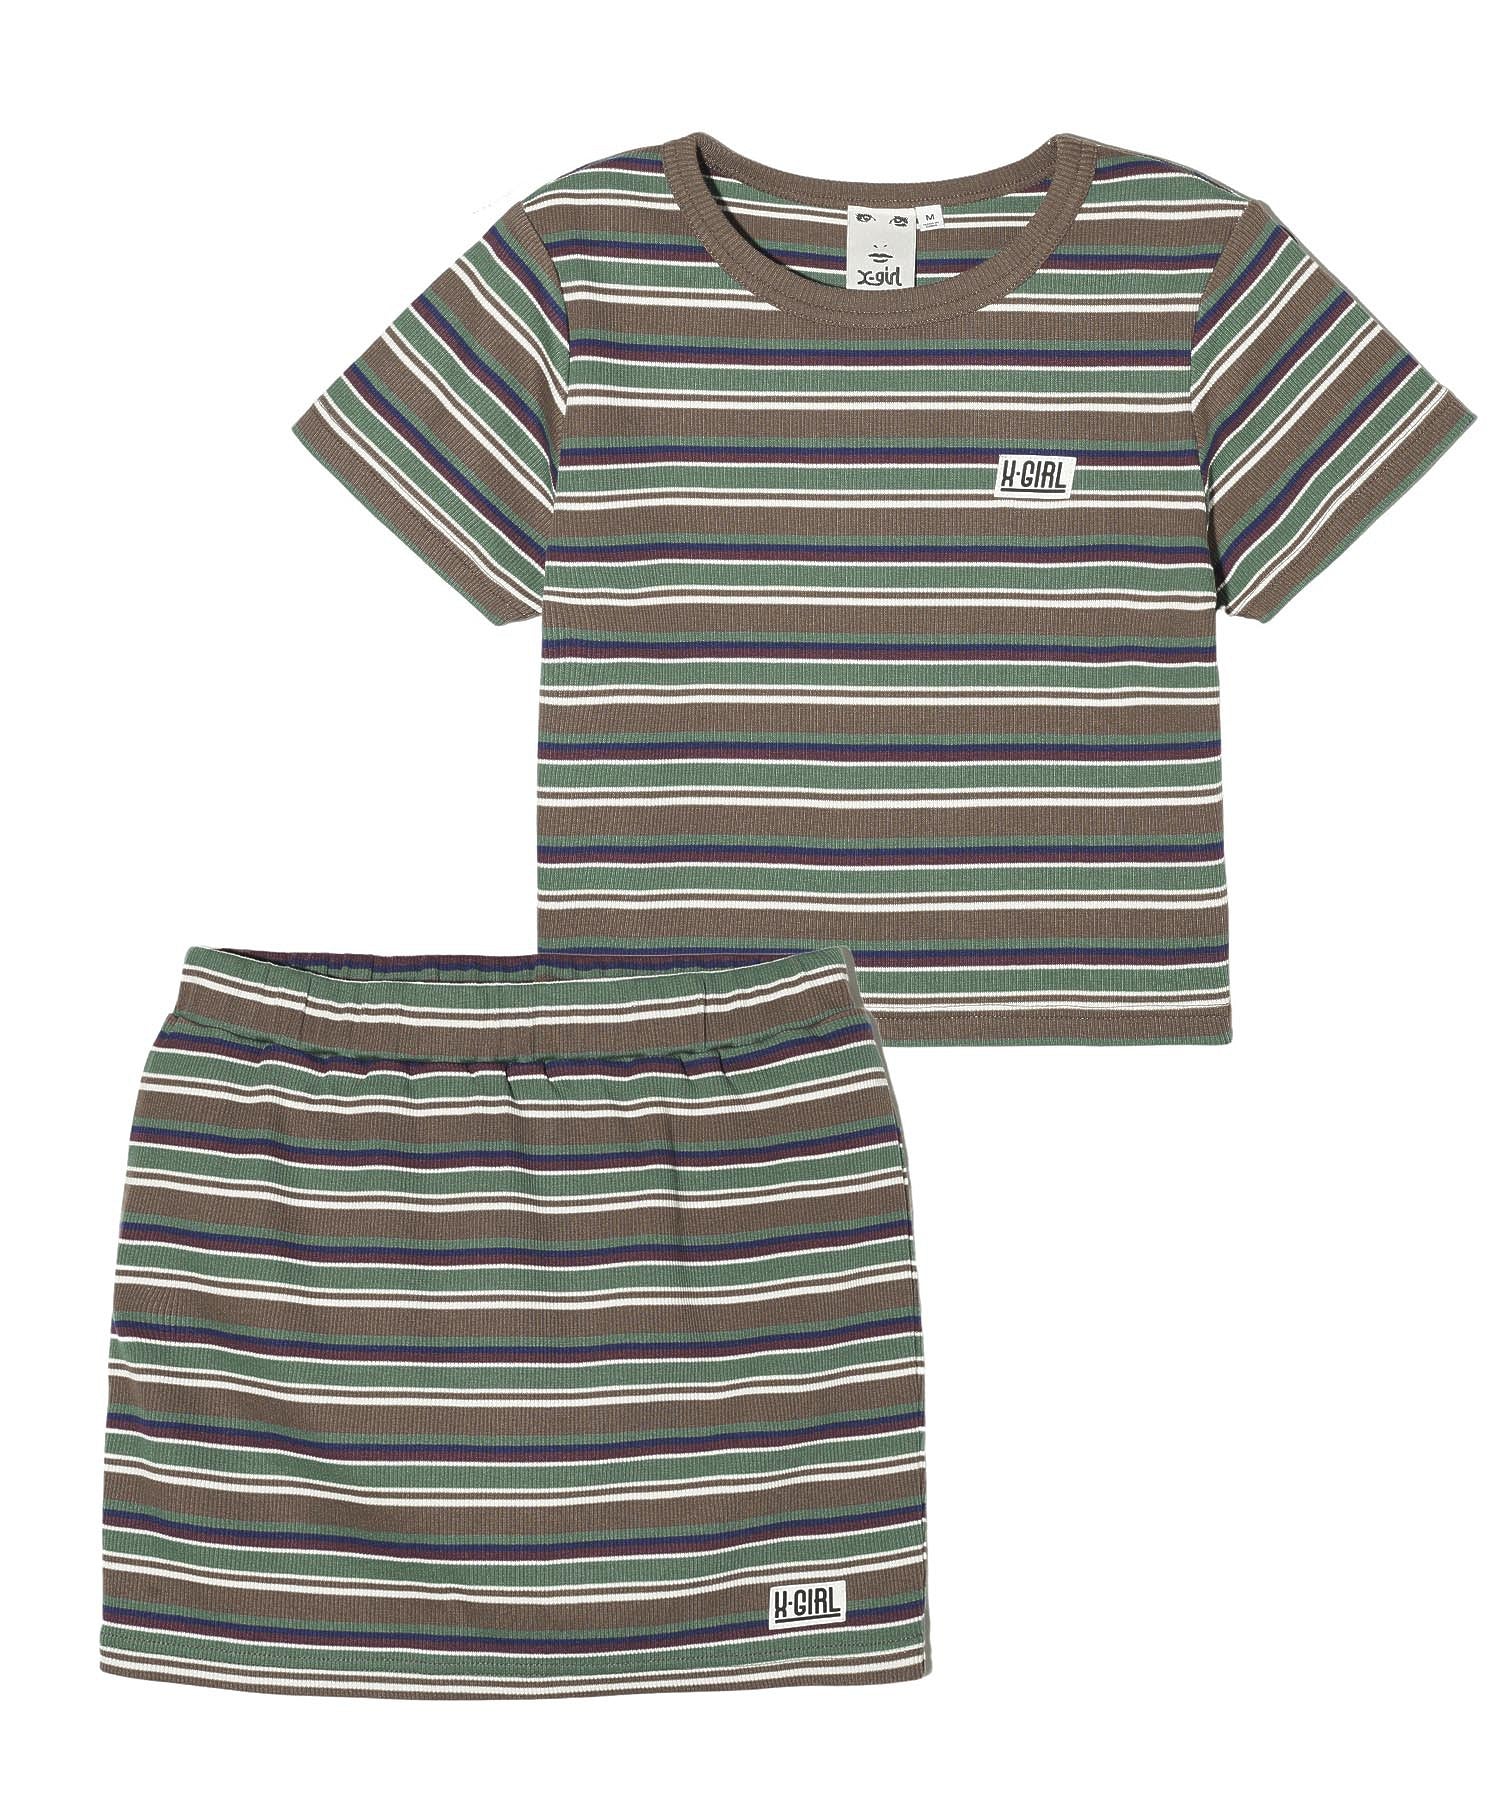 STRIPED S/S TOP AND SKIRT SET UP X-girl